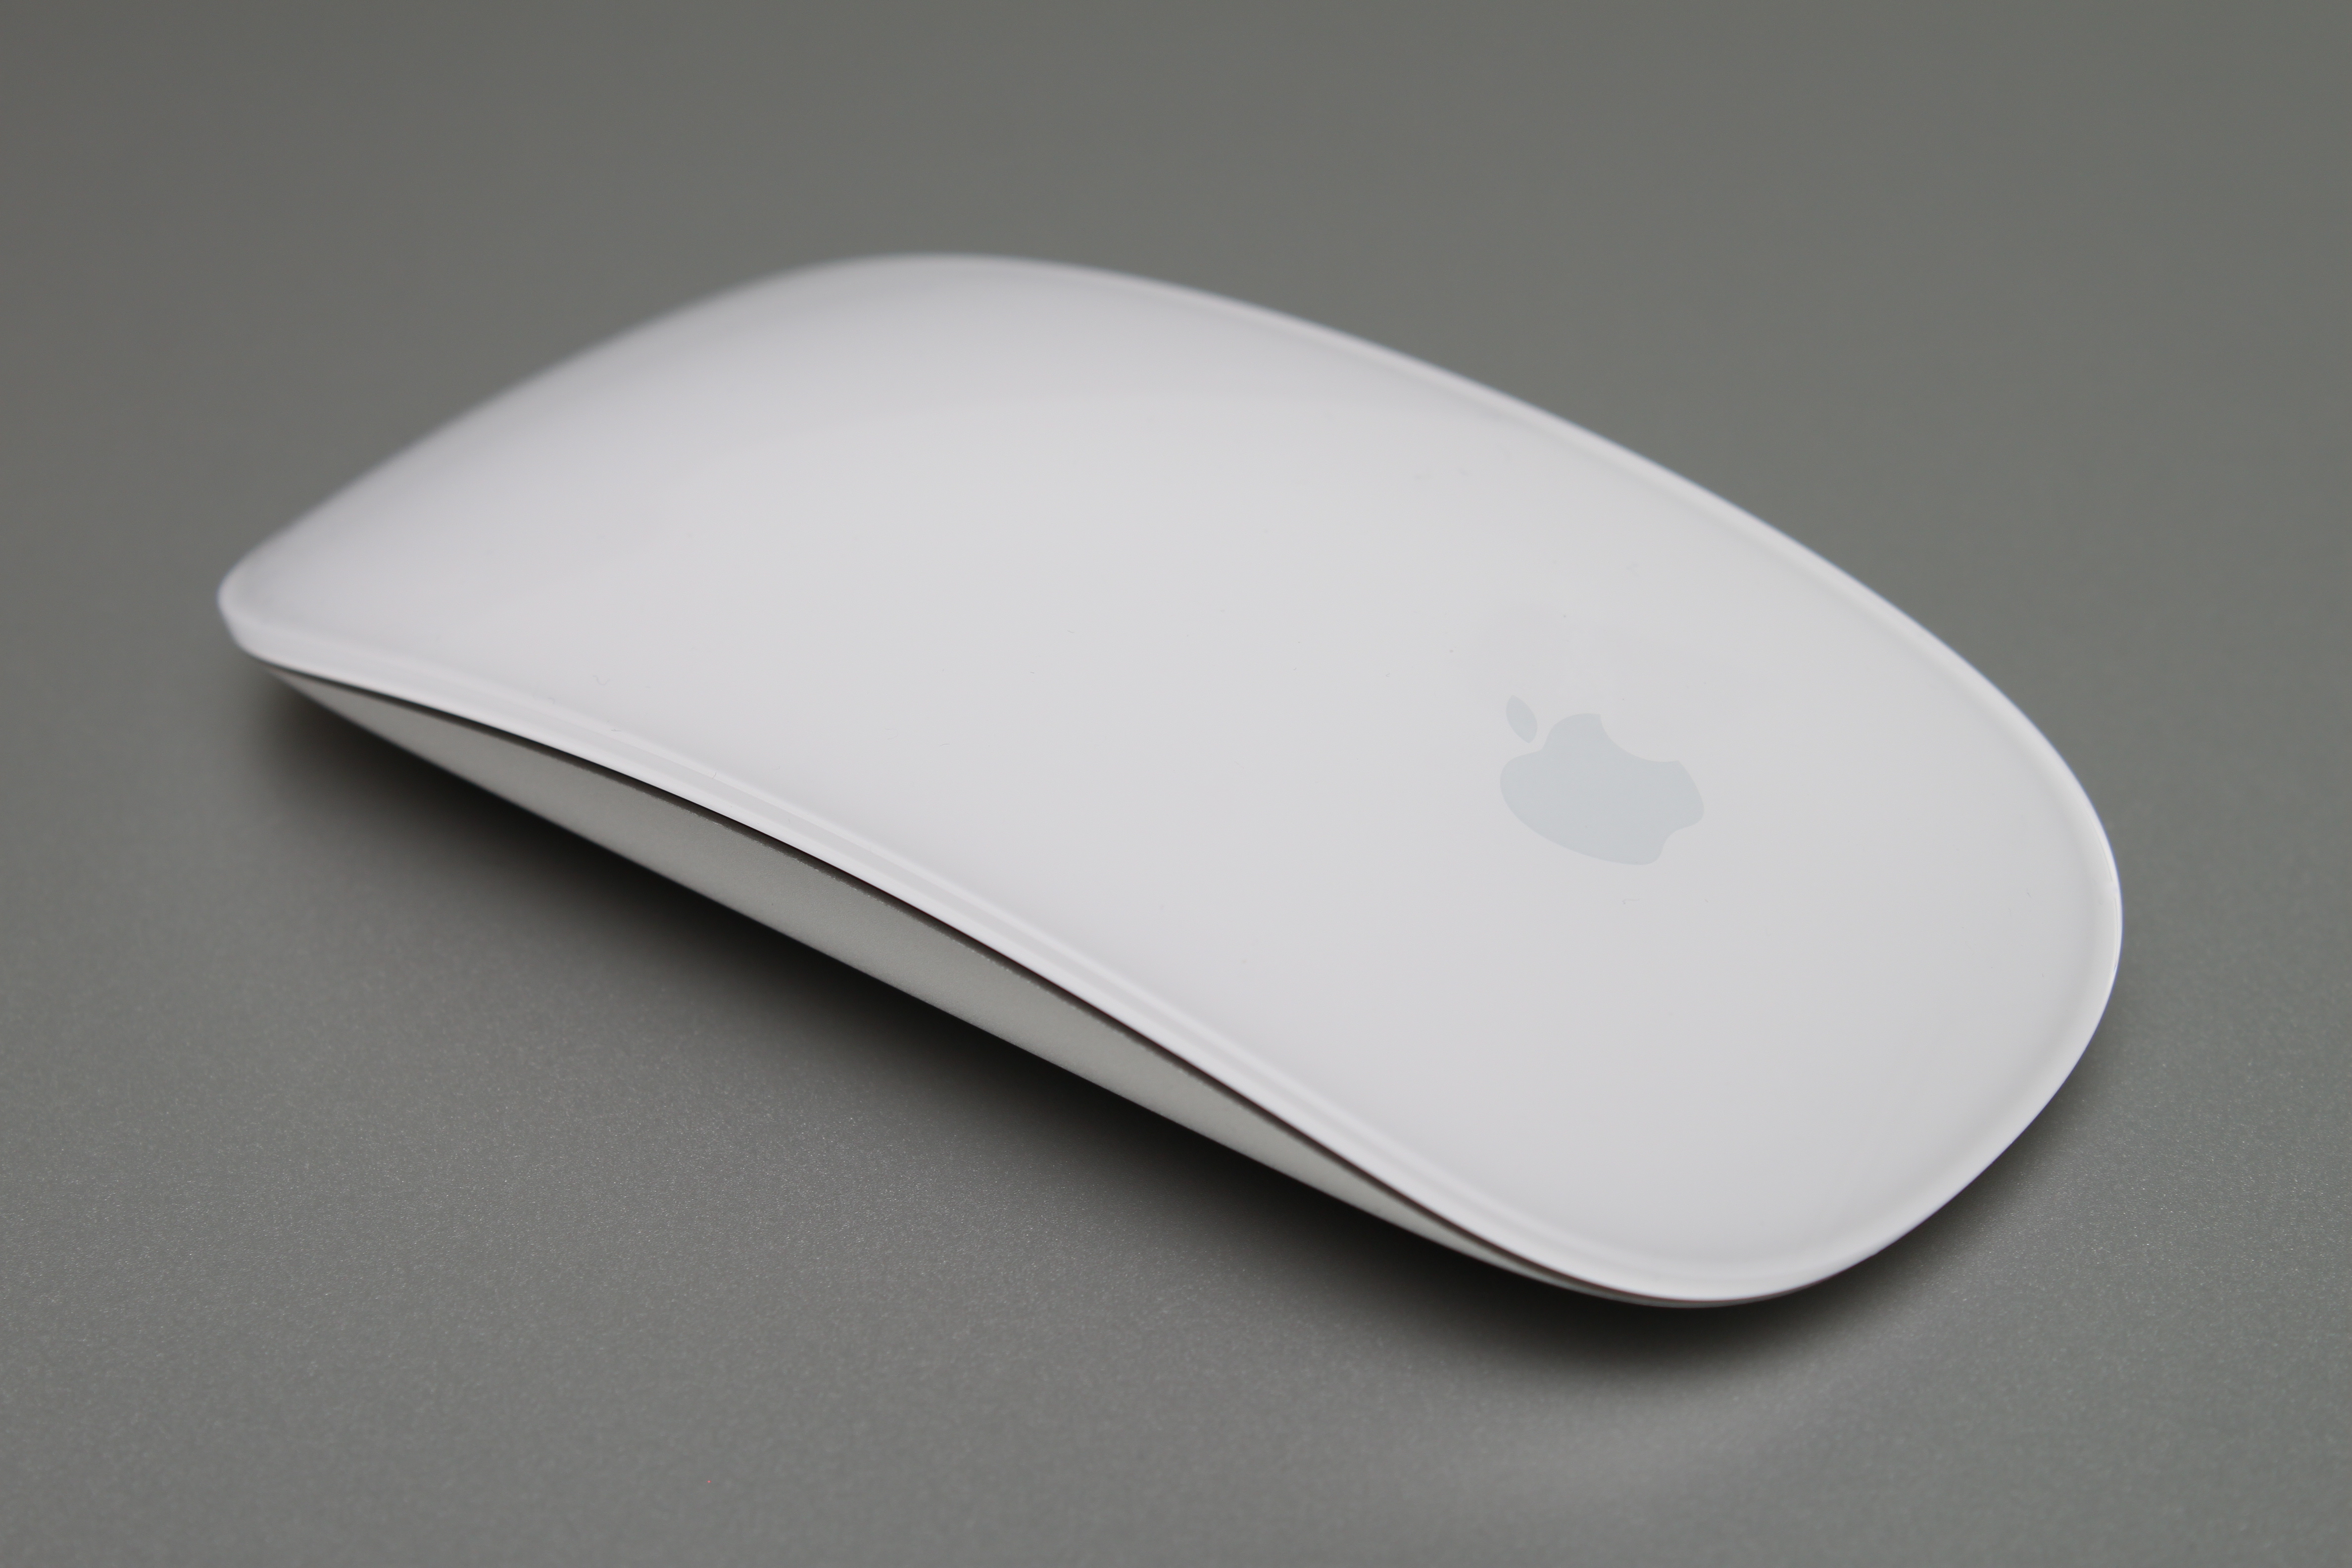 how to use apple mouse on windows xp